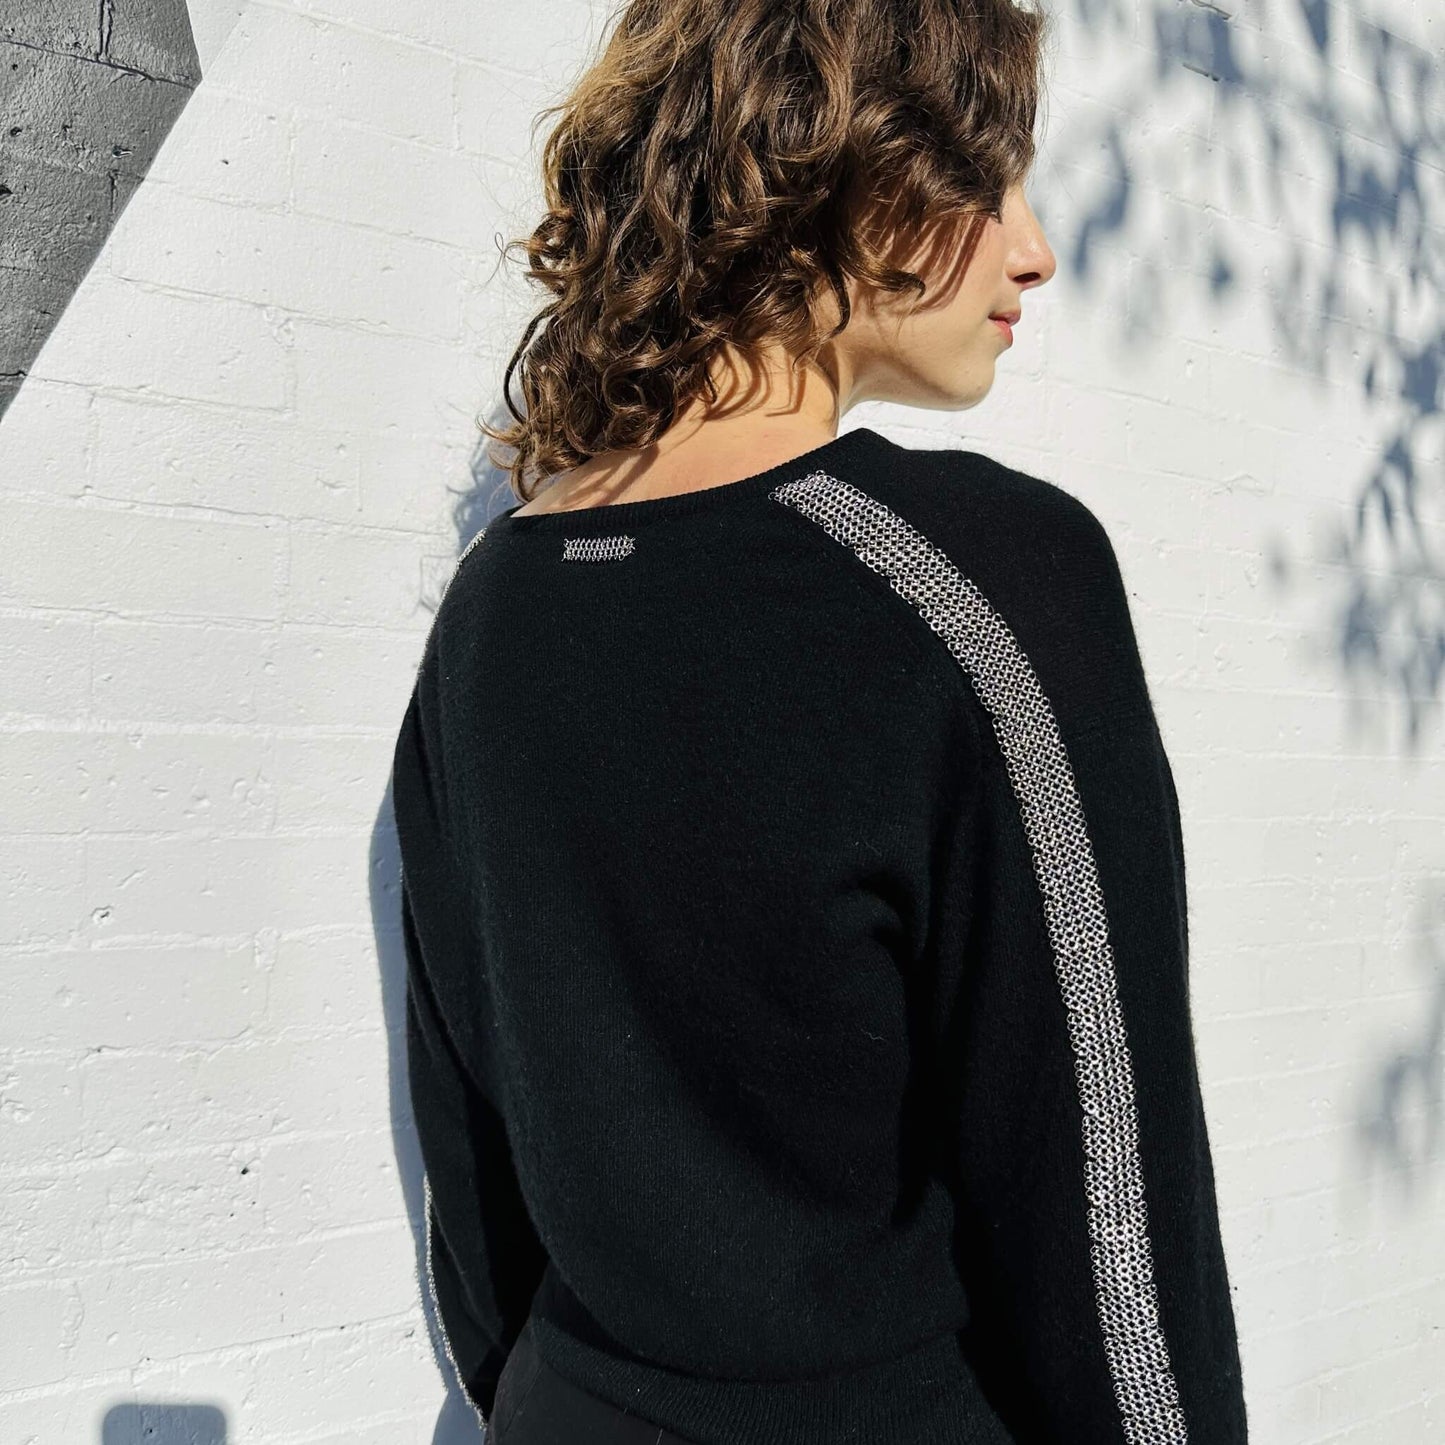 REWORKED CASHMERE SWEATER #03 - HELENA MAGDALENA